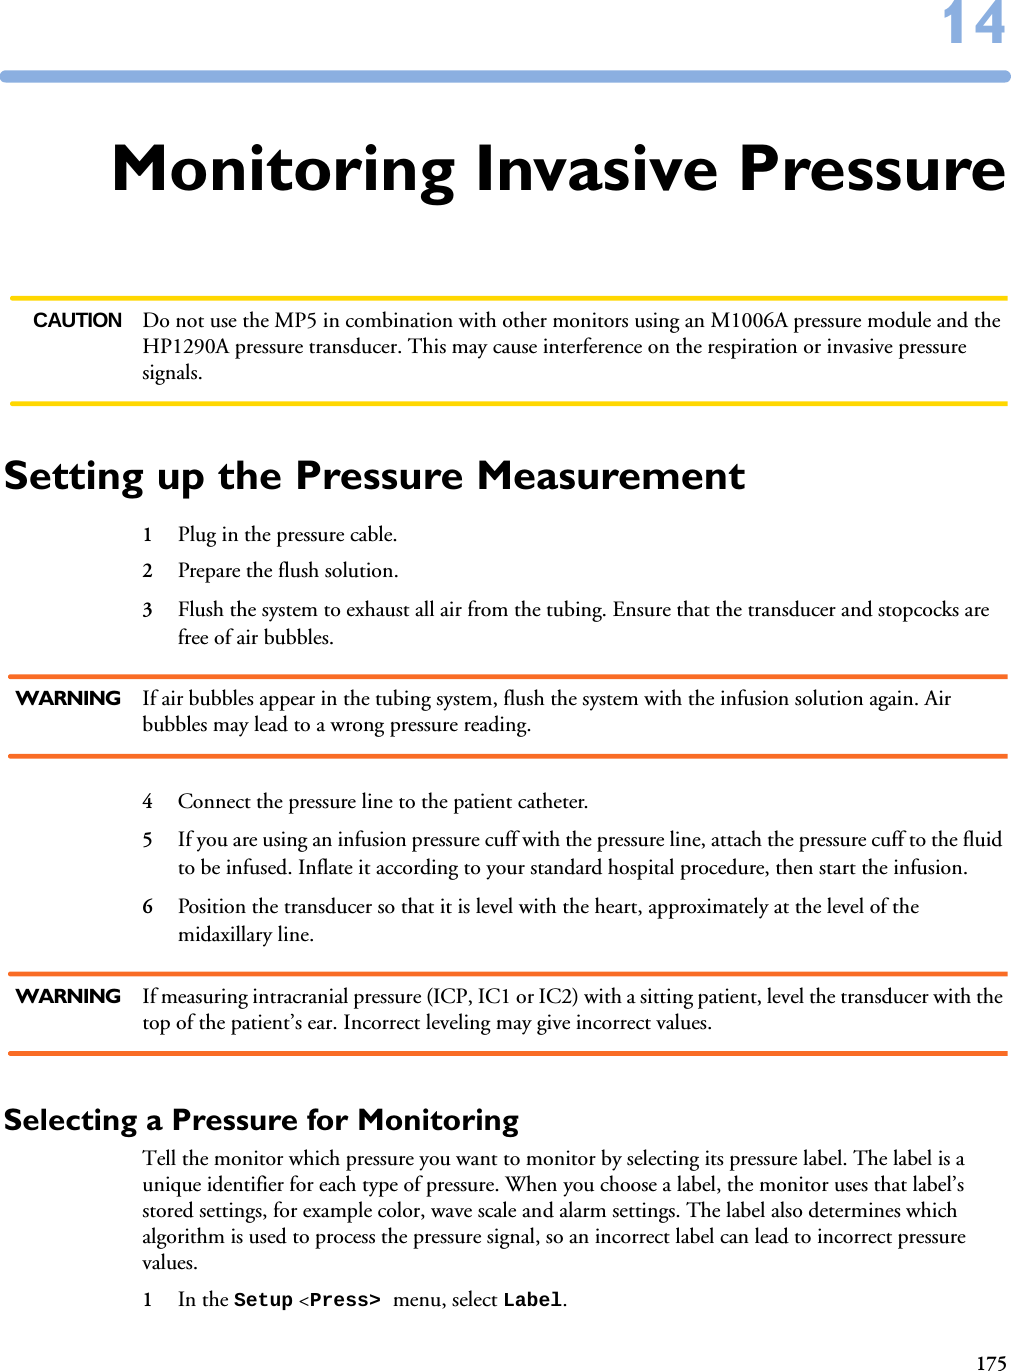 1751414Monitoring Invasive PressureCAUTION Do not use the MP5 in combination with other monitors using an M1006A pressure module and the HP1290A pressure transducer. This may cause interference on the respiration or invasive pressure signals. Setting up the Pressure Measurement1Plug in the pressure cable.2Prepare the flush solution.3Flush the system to exhaust all air from the tubing. Ensure that the transducer and stopcocks are free of air bubbles. WARNING If air bubbles appear in the tubing system, flush the system with the infusion solution again. Air bubbles may lead to a wrong pressure reading.4Connect the pressure line to the patient catheter.5If you are using an infusion pressure cuff with the pressure line, attach the pressure cuff to the fluid to be infused. Inflate it according to your standard hospital procedure, then start the infusion.6Position the transducer so that it is level with the heart, approximately at the level of the midaxillary line. WARNING If measuring intracranial pressure (ICP, IC1 or IC2) with a sitting patient, level the transducer with the top of the patient’s ear. Incorrect leveling may give incorrect values.Selecting a Pressure for MonitoringTell the monitor which pressure you want to monitor by selecting its pressure label. The label is a unique identifier for each type of pressure. When you choose a label, the monitor uses that label’s stored settings, for example color, wave scale and alarm settings. The label also determines which algorithm is used to process the pressure signal, so an incorrect label can lead to incorrect pressure values. 1In the Setup &lt;Press&gt; menu, select Label.